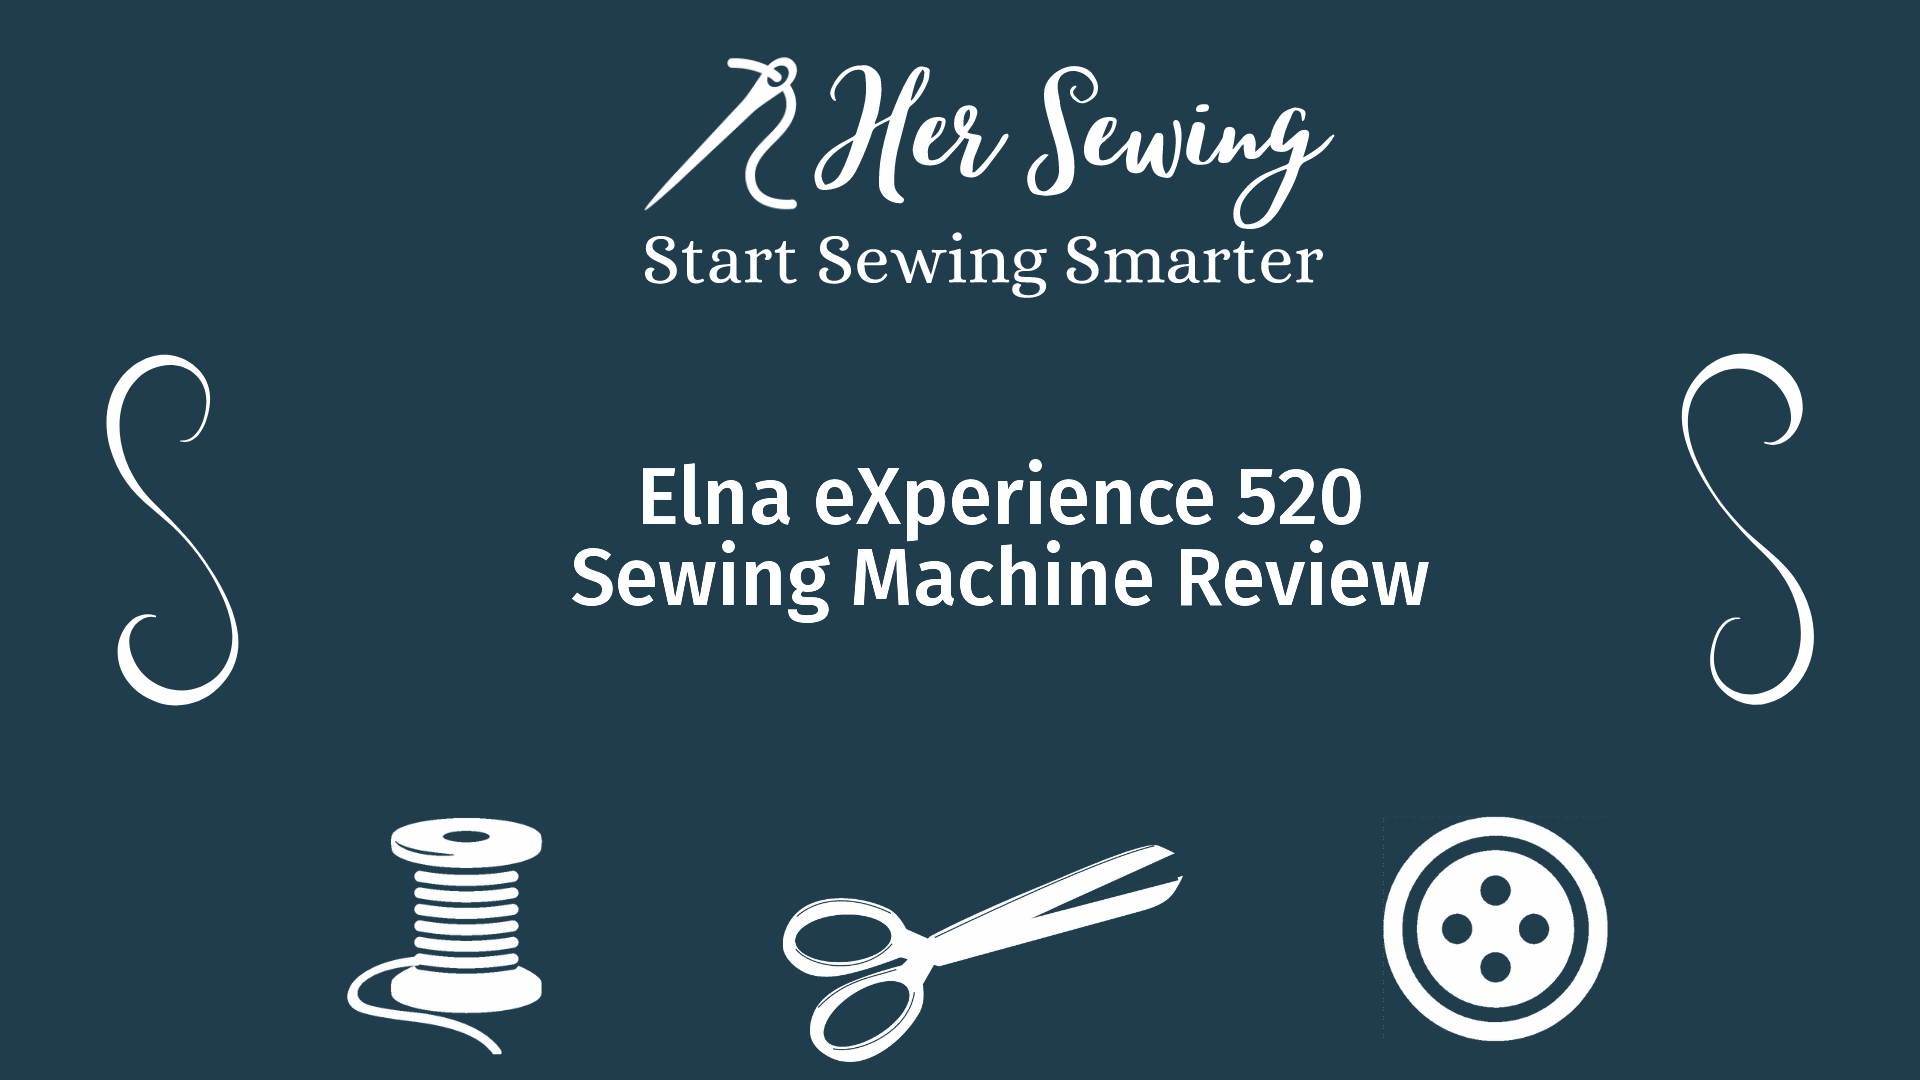 Elna eXperience 520 Sewing Machine Review